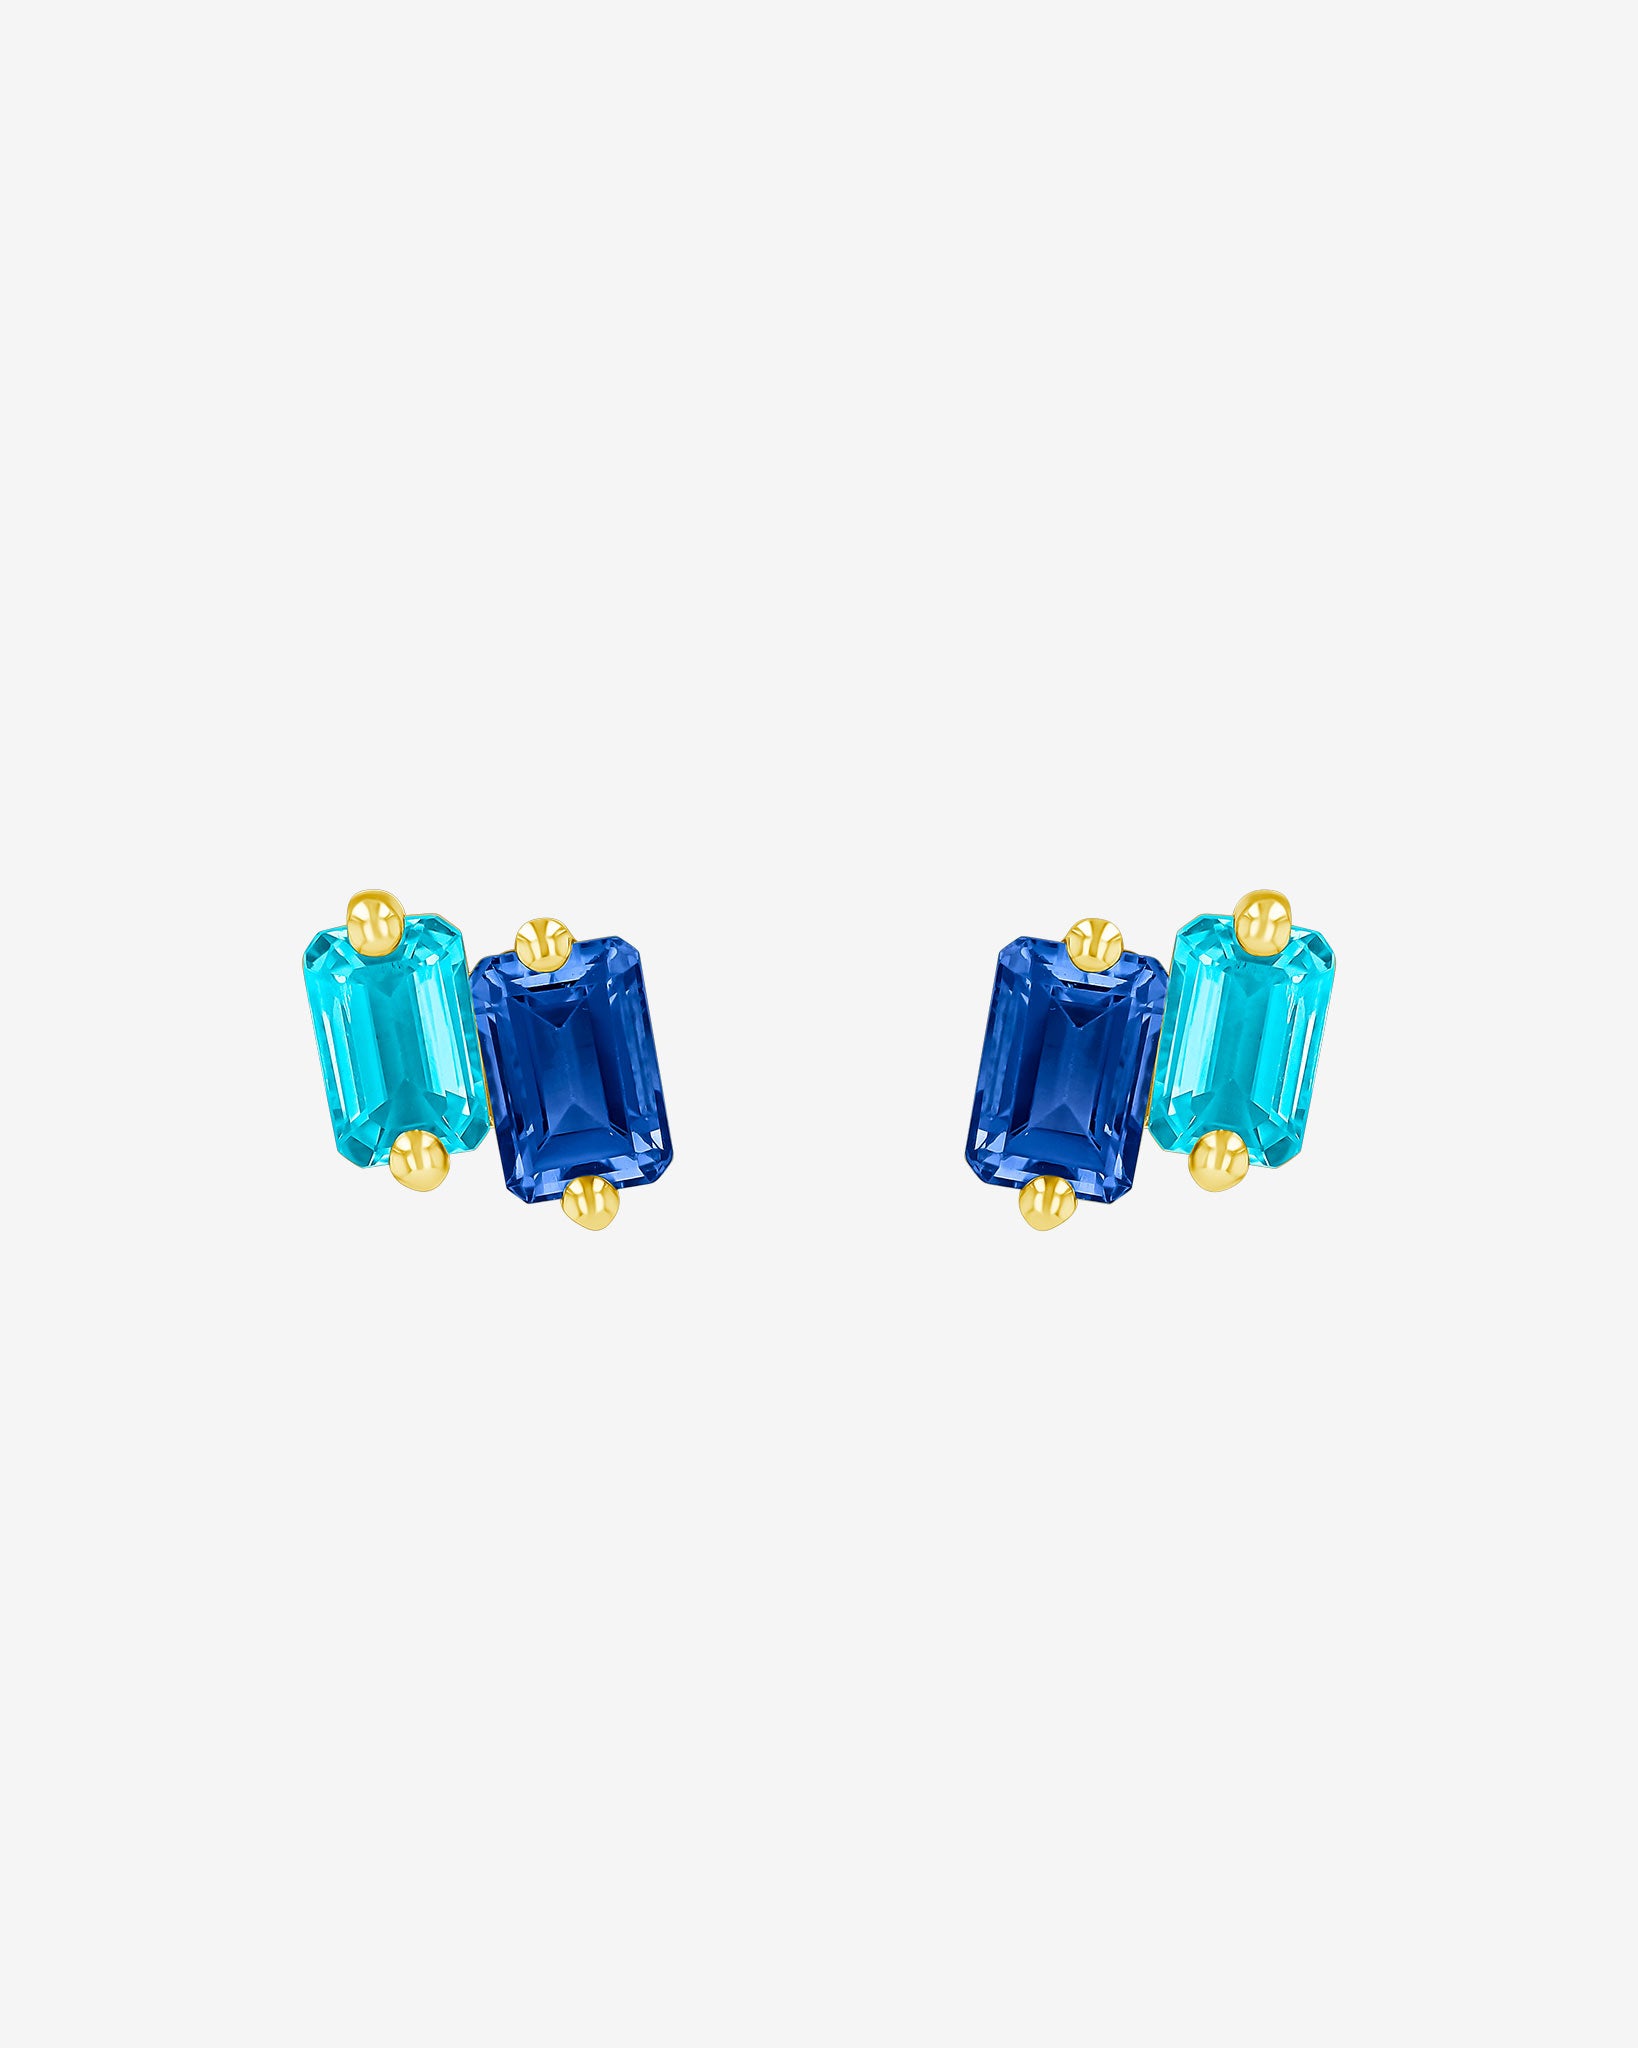 Kalan By Suzanne Kalan Ann Blue Ombre Studs in 14k yellow gold